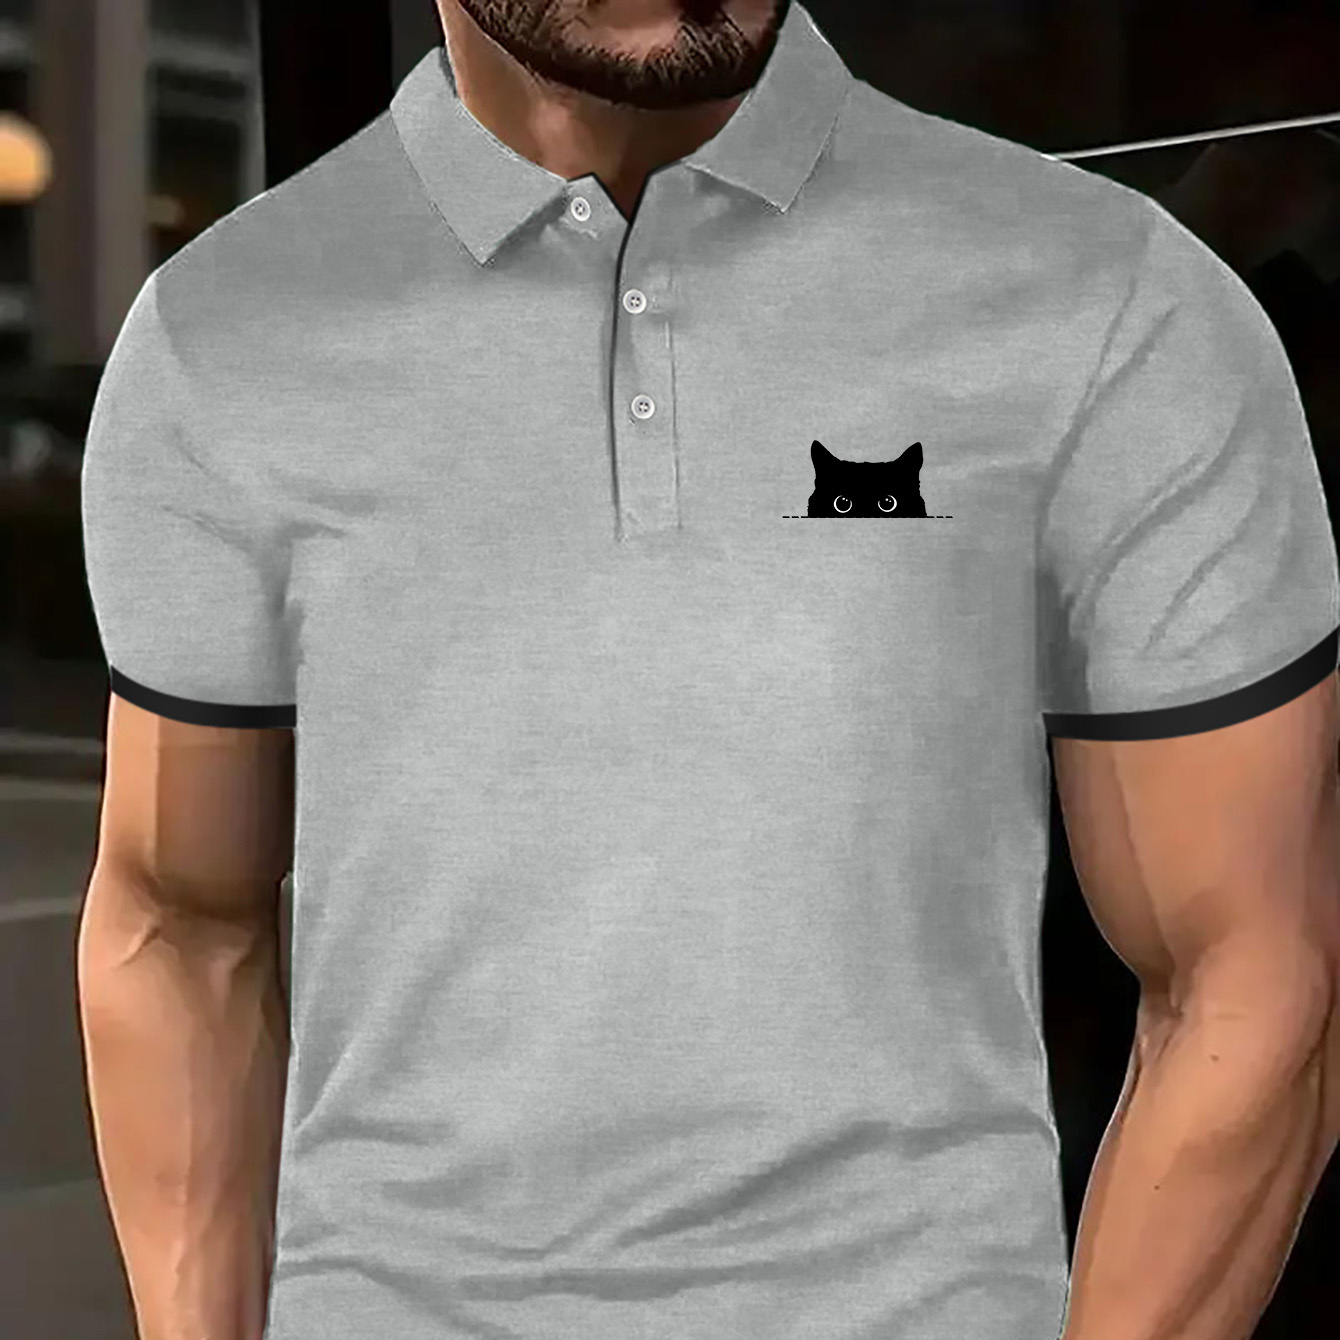 

Cat Print Summer Men's Fashionable Lapel Short Sleeve Golf T-shirt, Suitable For Commercial Entertainment Occasions, Such As Tennis And Golf, Men's Clothing, As Gifts